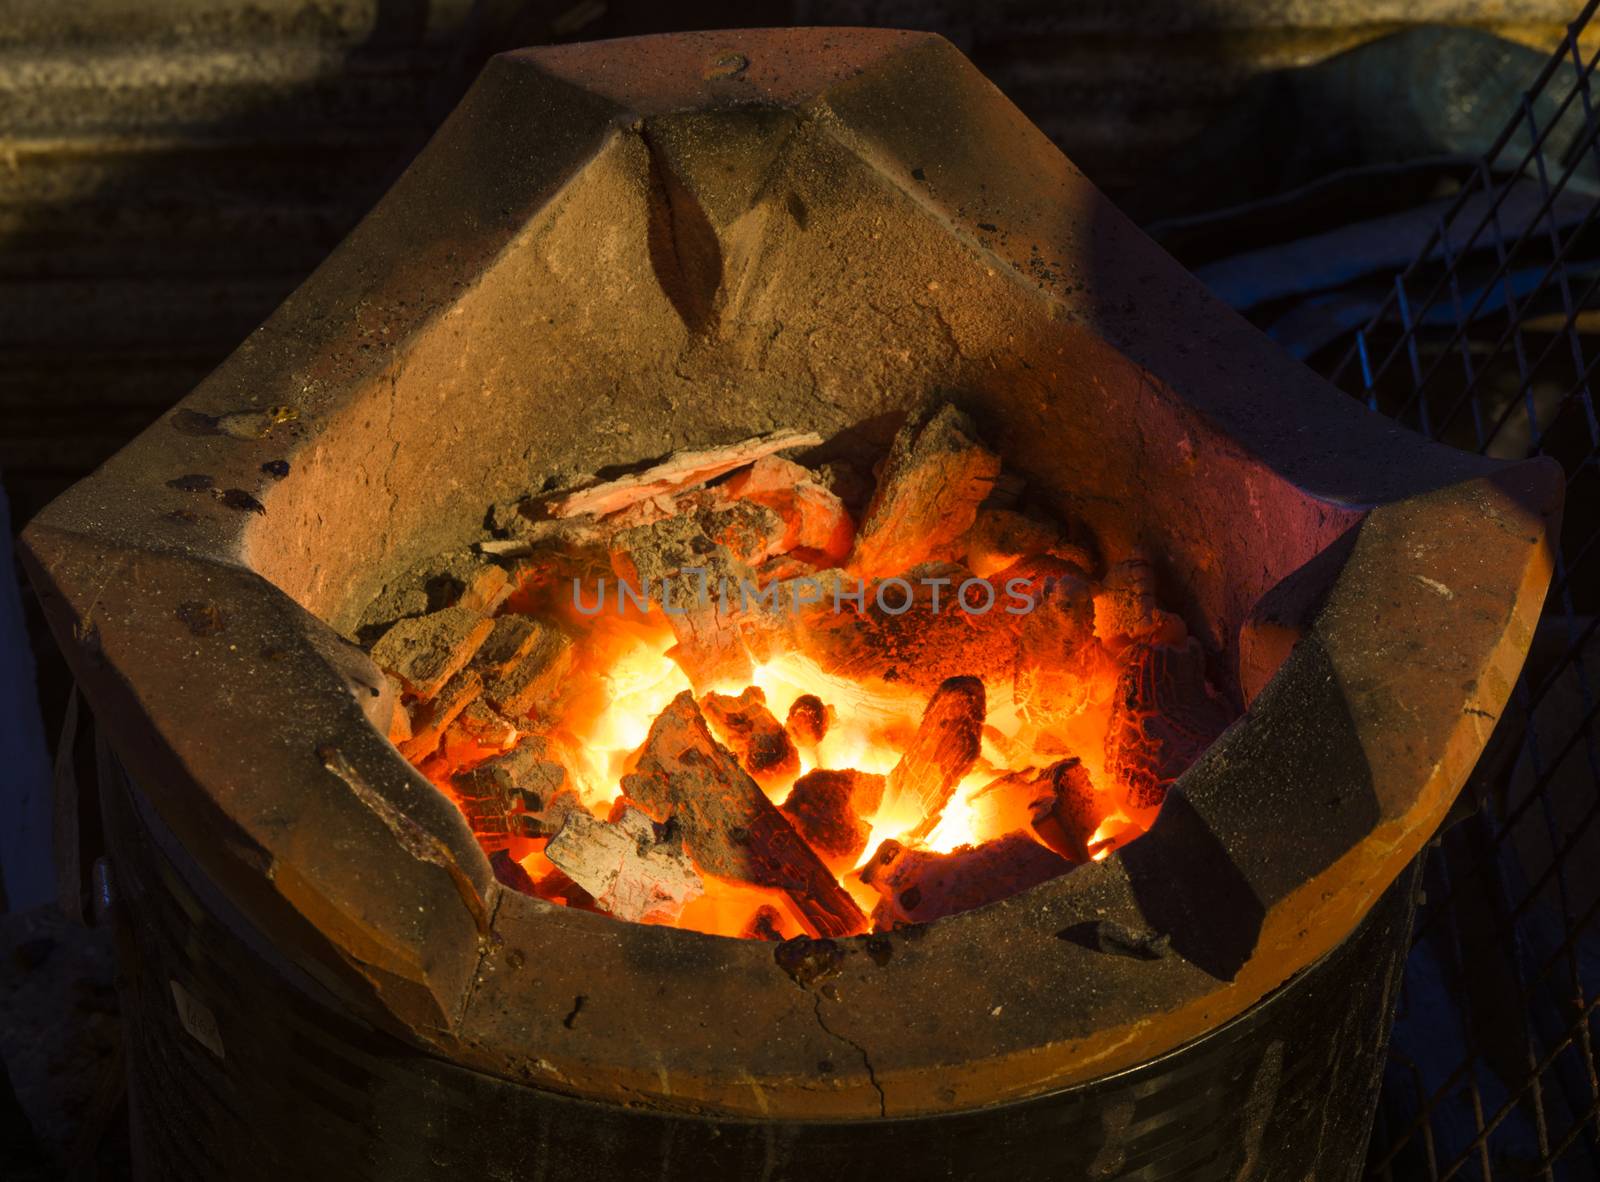 Stove with coals burning down and hot